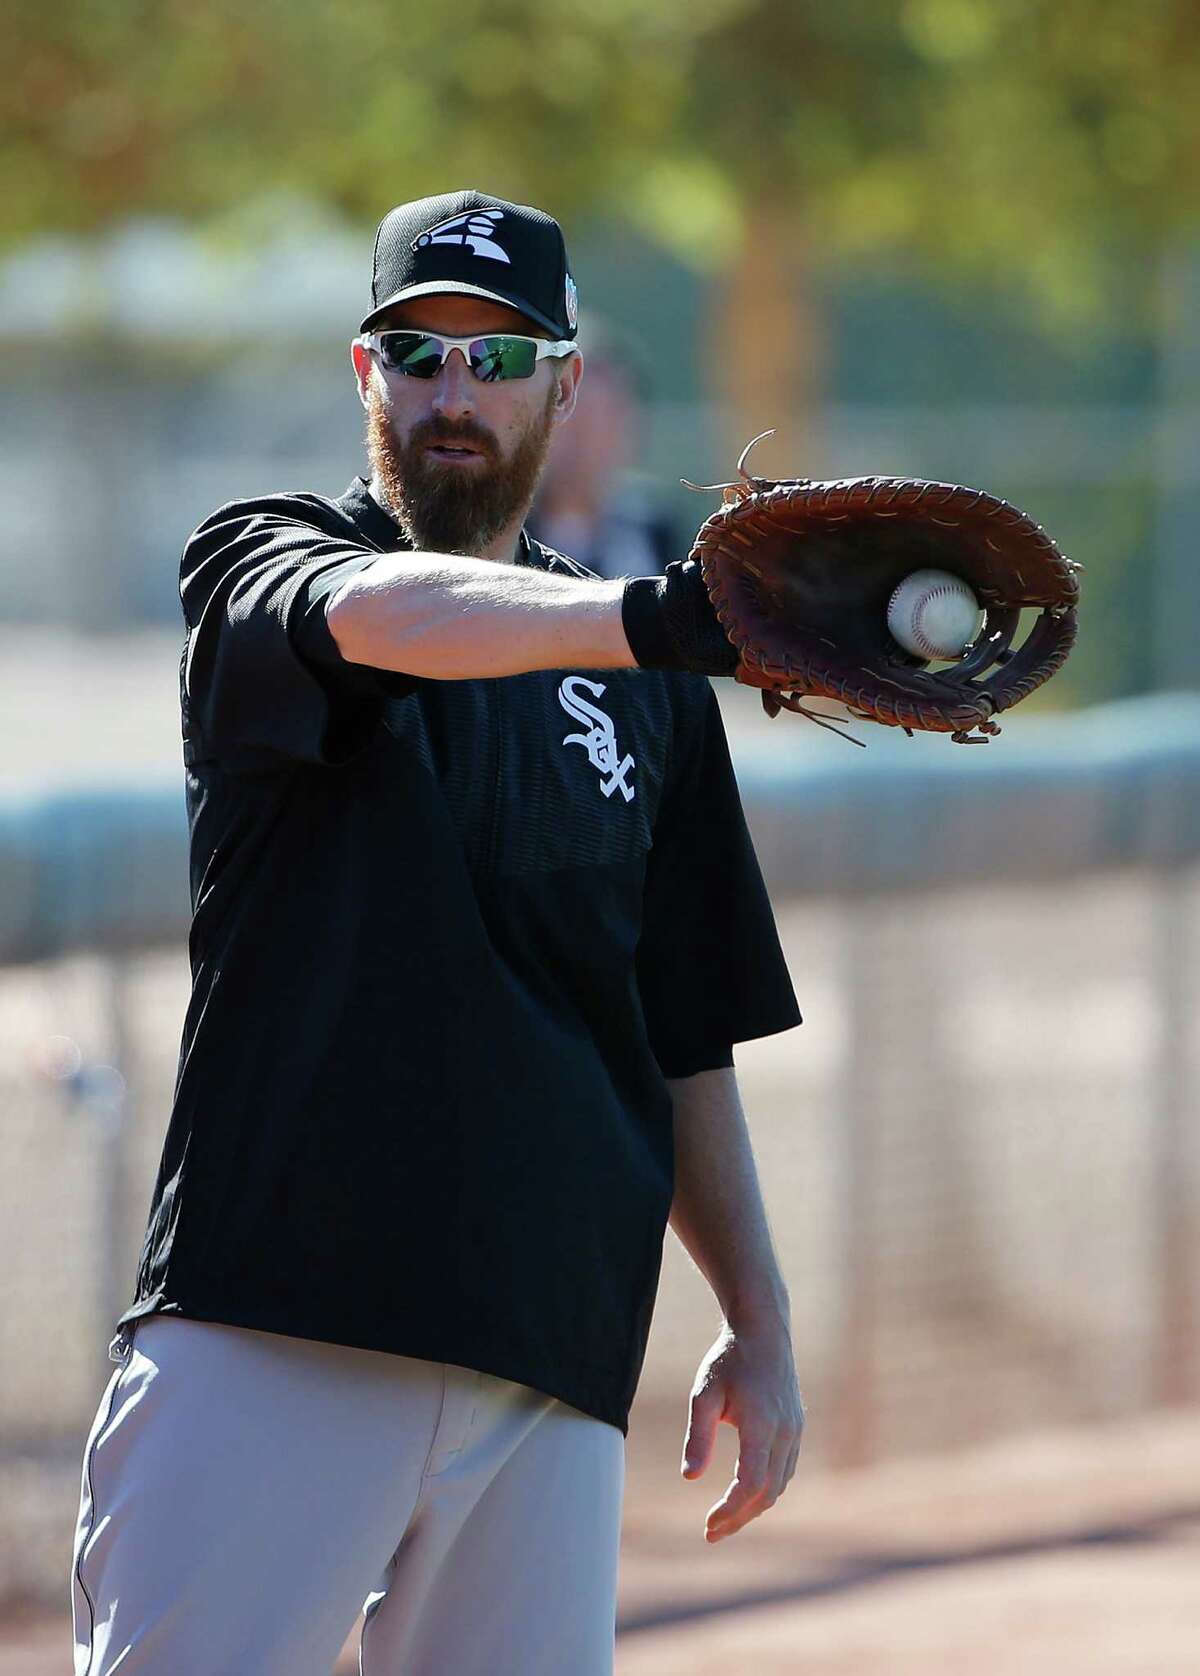 Chicago White Sox's Adam LaRoche catches the baseball as he warms up during a spring training baseball workout Wednesday, Feb. 24, 2016, in Glendale, Ariz. (AP Photo/Ross D. Franklin) ORG XMIT: AZRF117